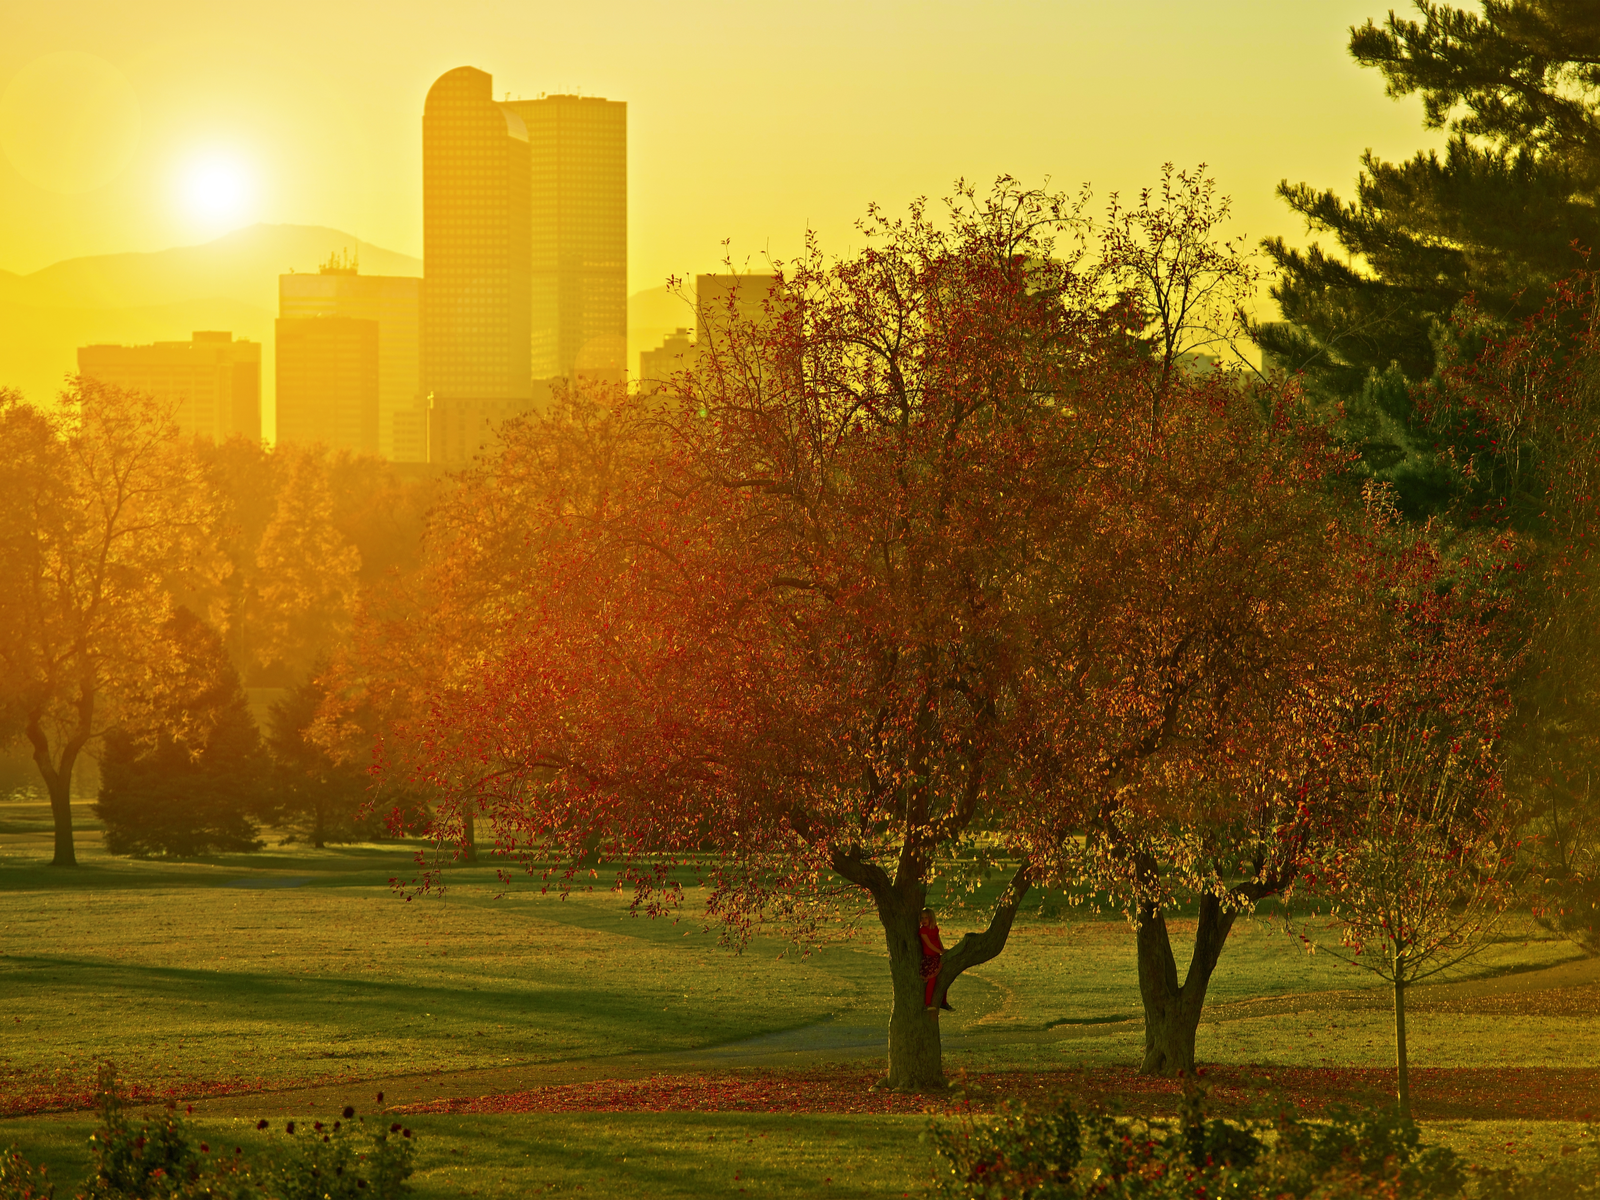 View of the downtown skyline with the sun blinding the camera pictured during the best time to visit Denver